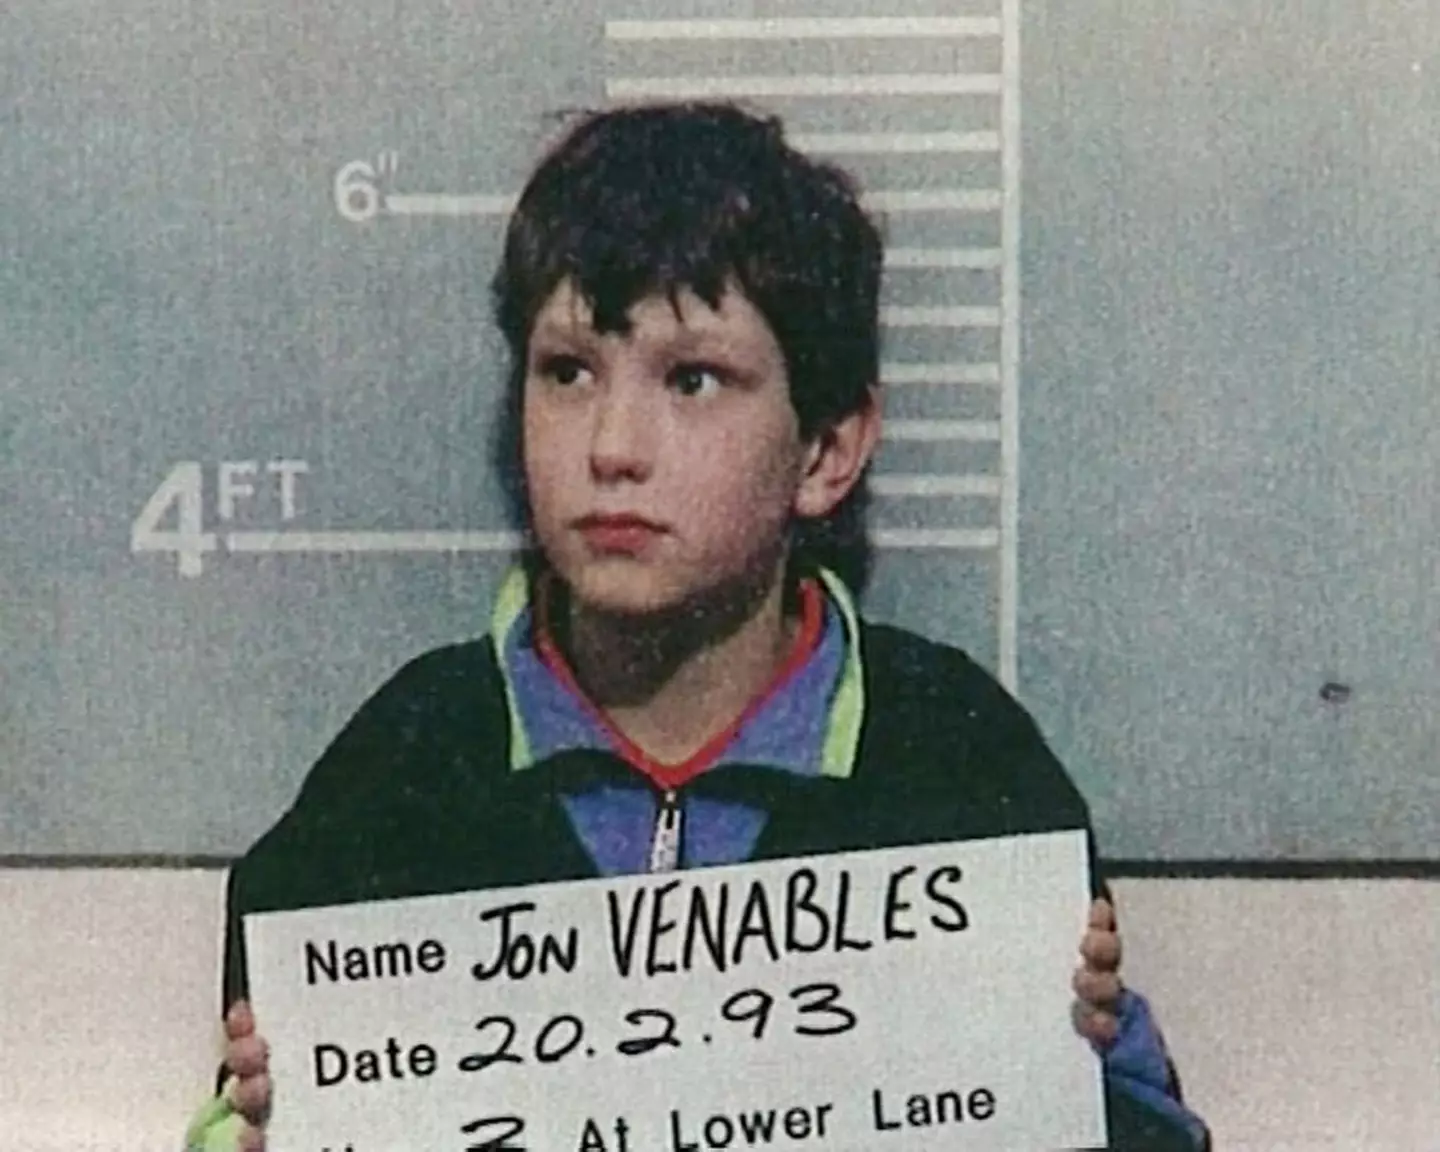 Jon Venables was 10-years-old when he tortured and killed James Bulger.